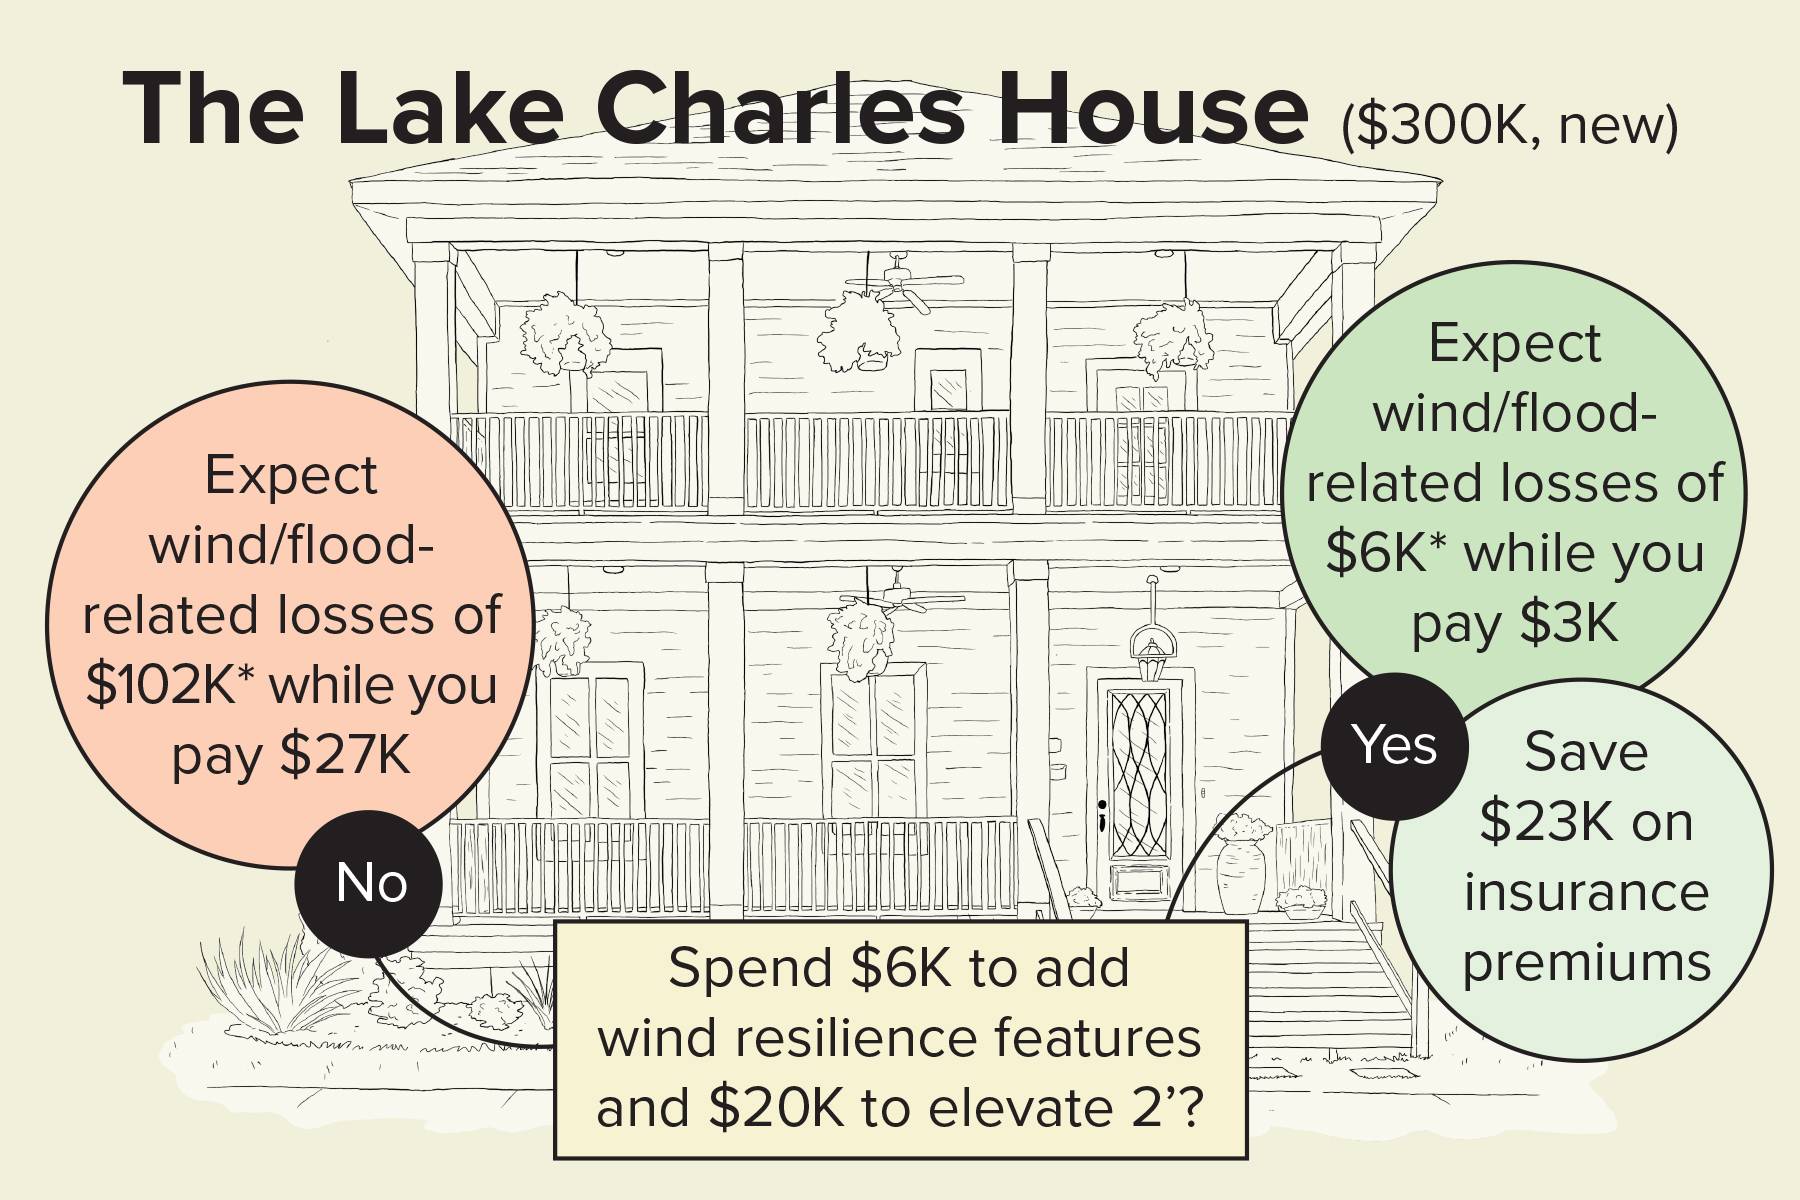 Lake Charles House: spend $26k on wind resilience and 2' elevation; save $23K on insurance premiums; may reduce wind-flood damage by $96K and out-of-pocket costs by $24K